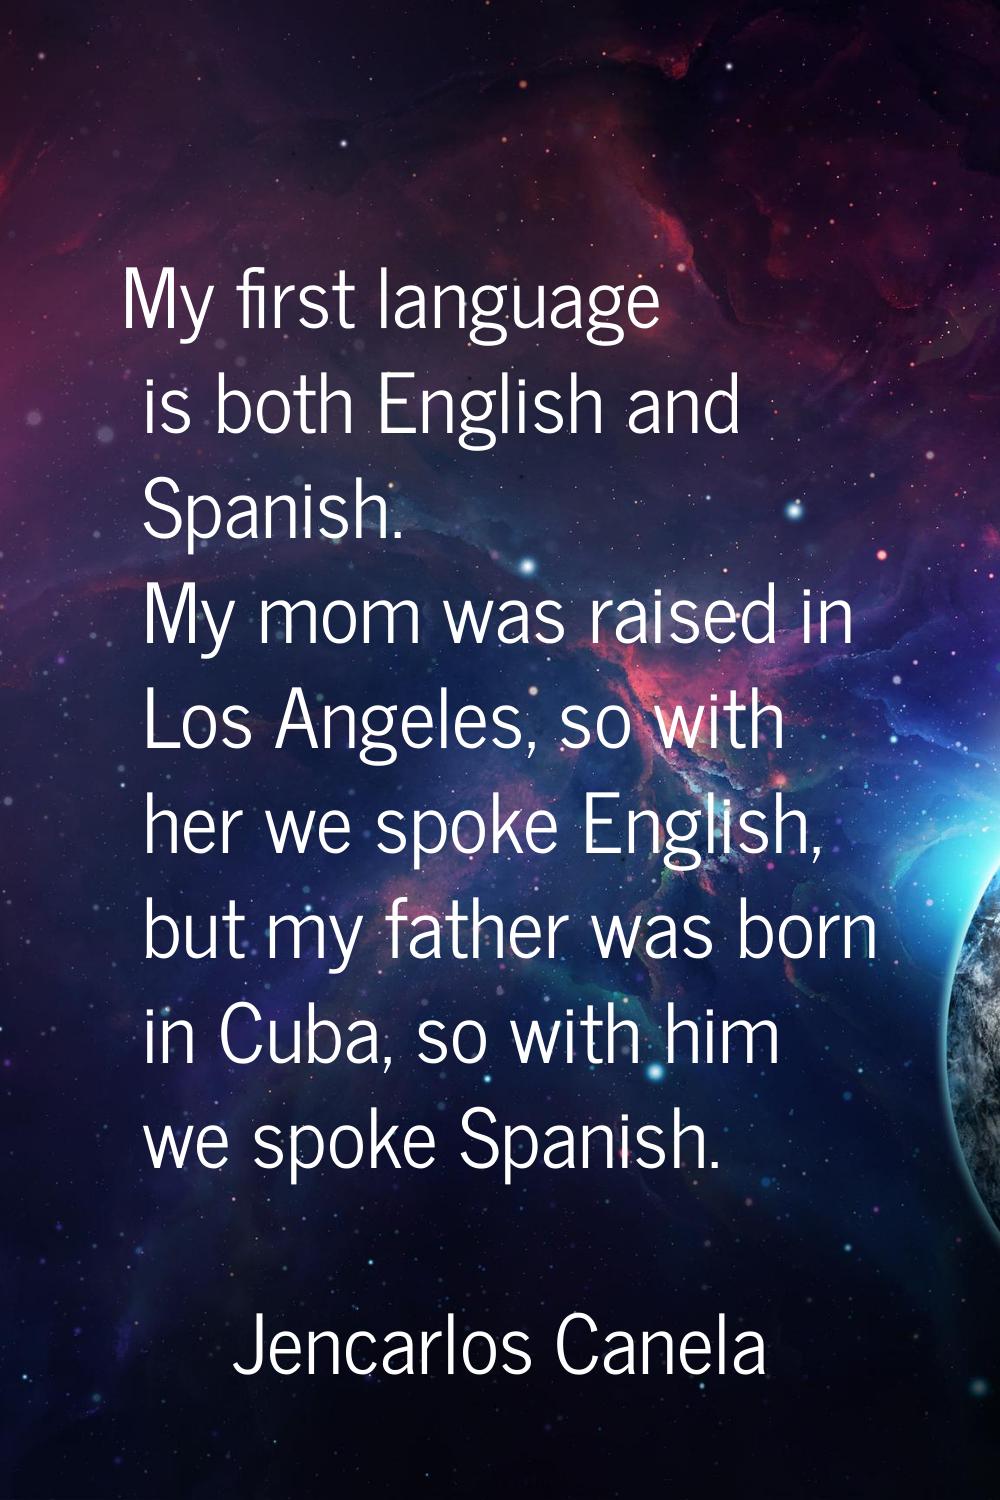 My first language is both English and Spanish. My mom was raised in Los Angeles, so with her we spo